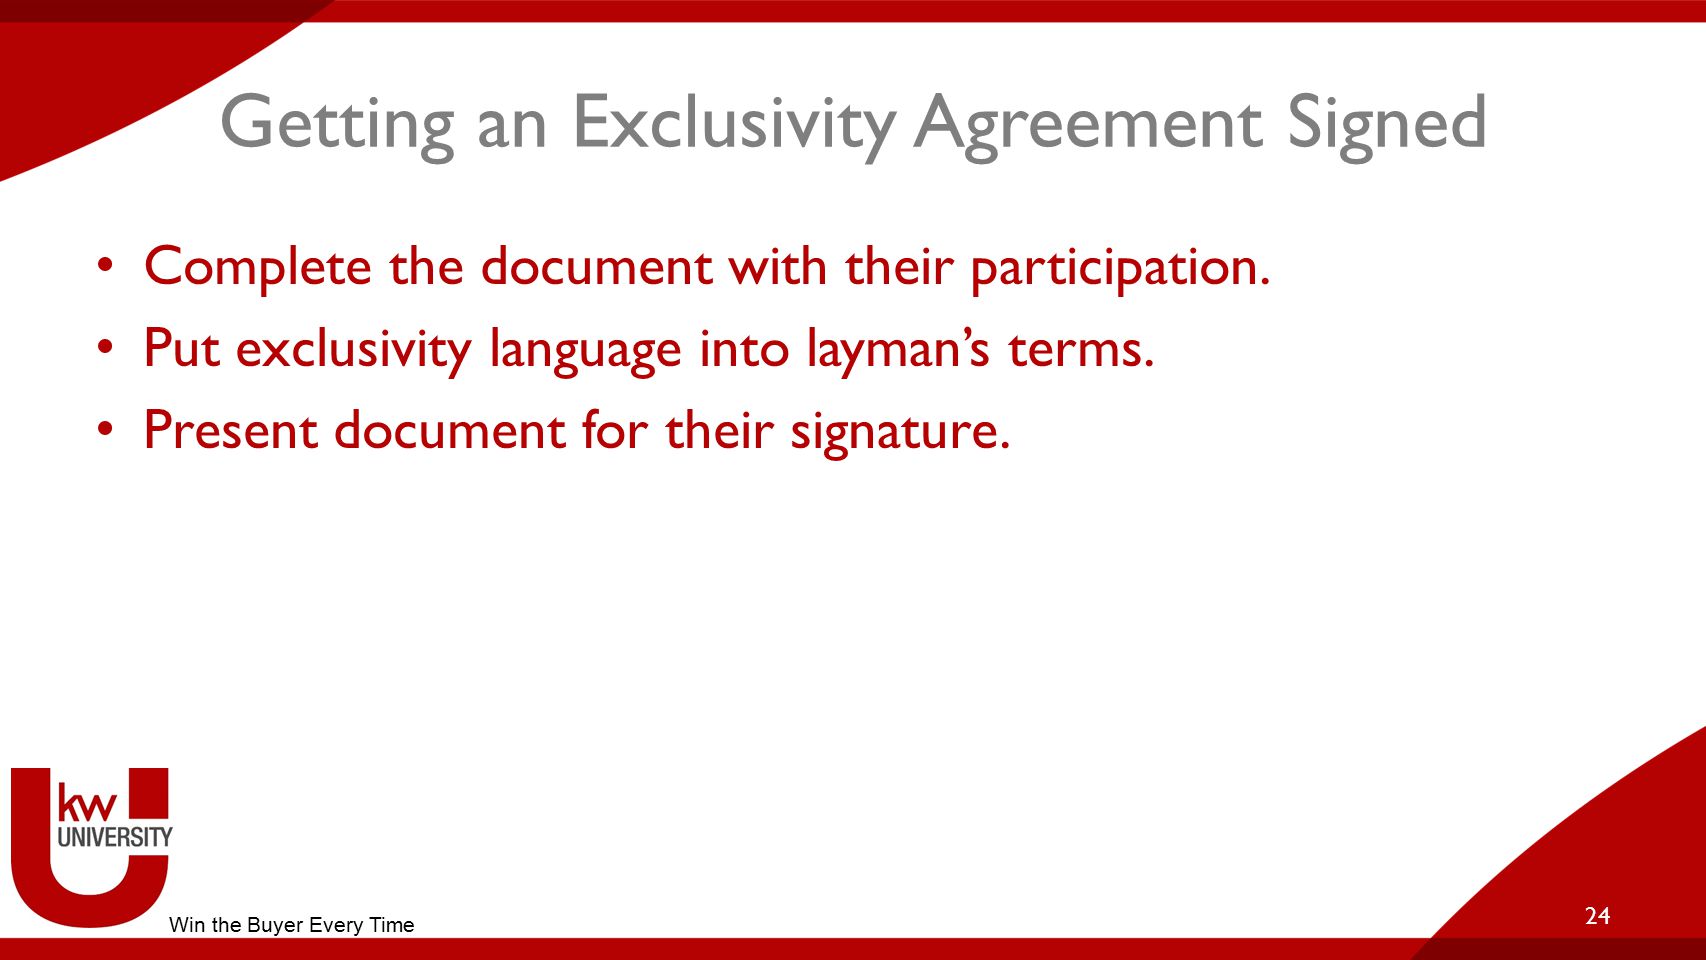 Getting an Exclusivity Agreement Signed